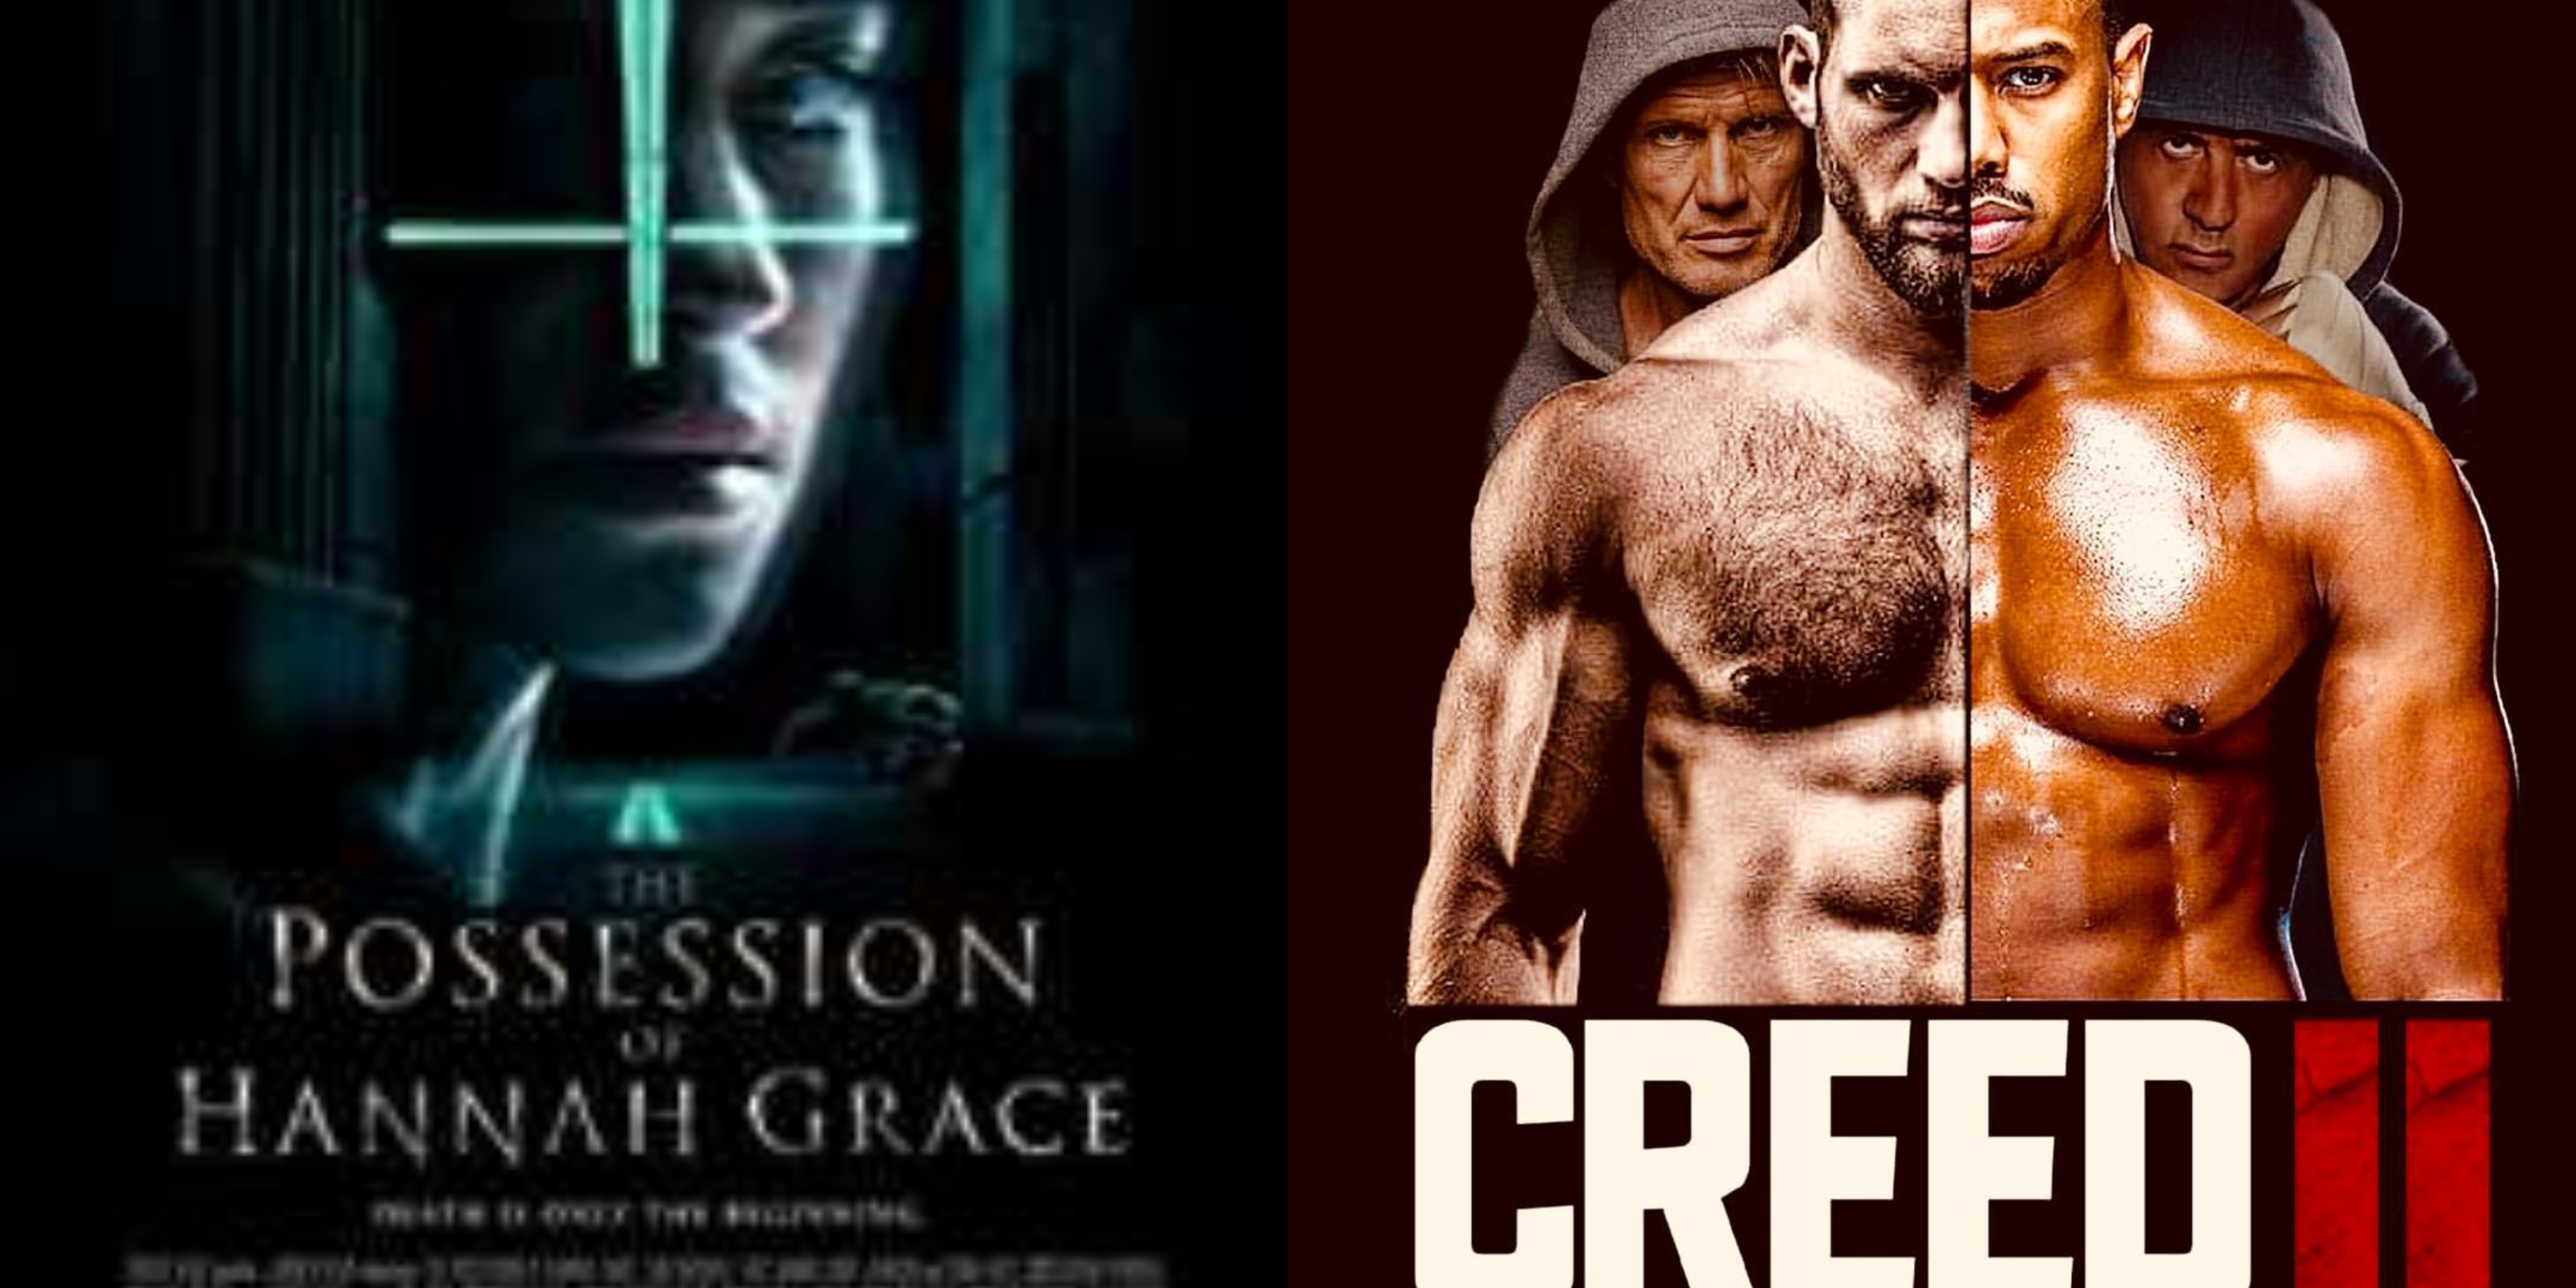 The Possession of Hannah Grace and Creed 2